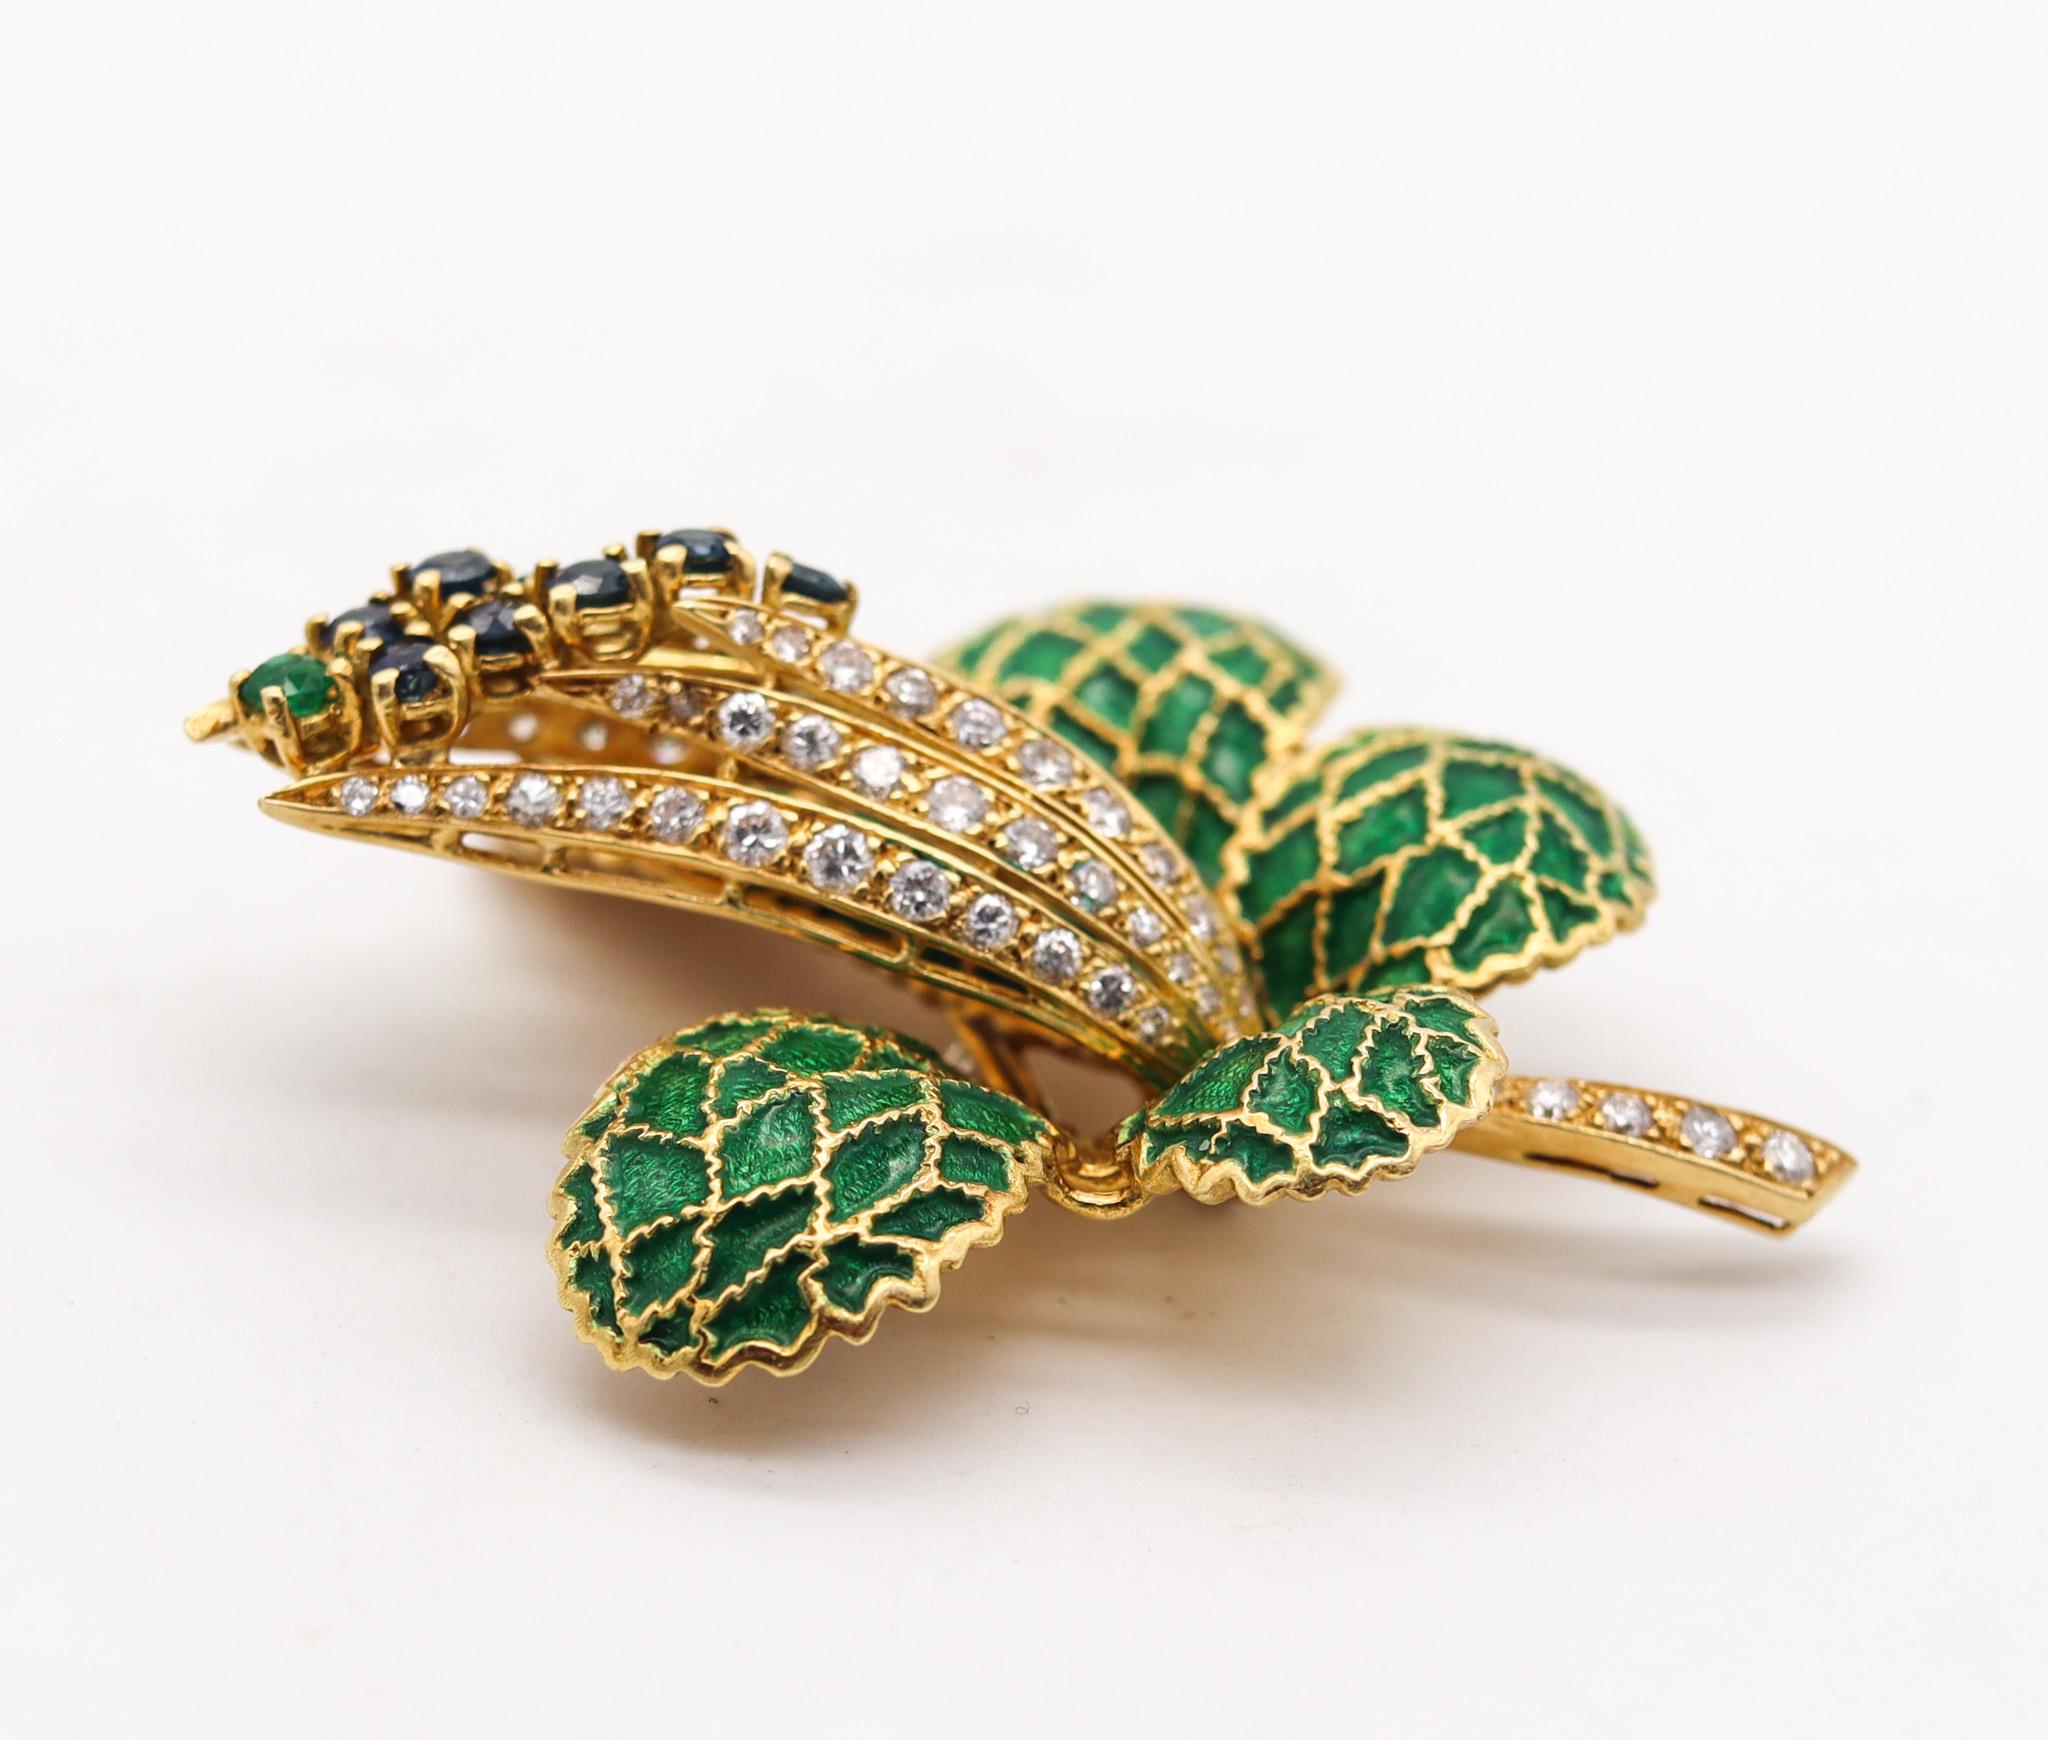 Brilliant Cut Italy Mid Century 1960 Enamel Brooch 18Kt Gold With 4.42 Ctw Diamonds Sapphires For Sale